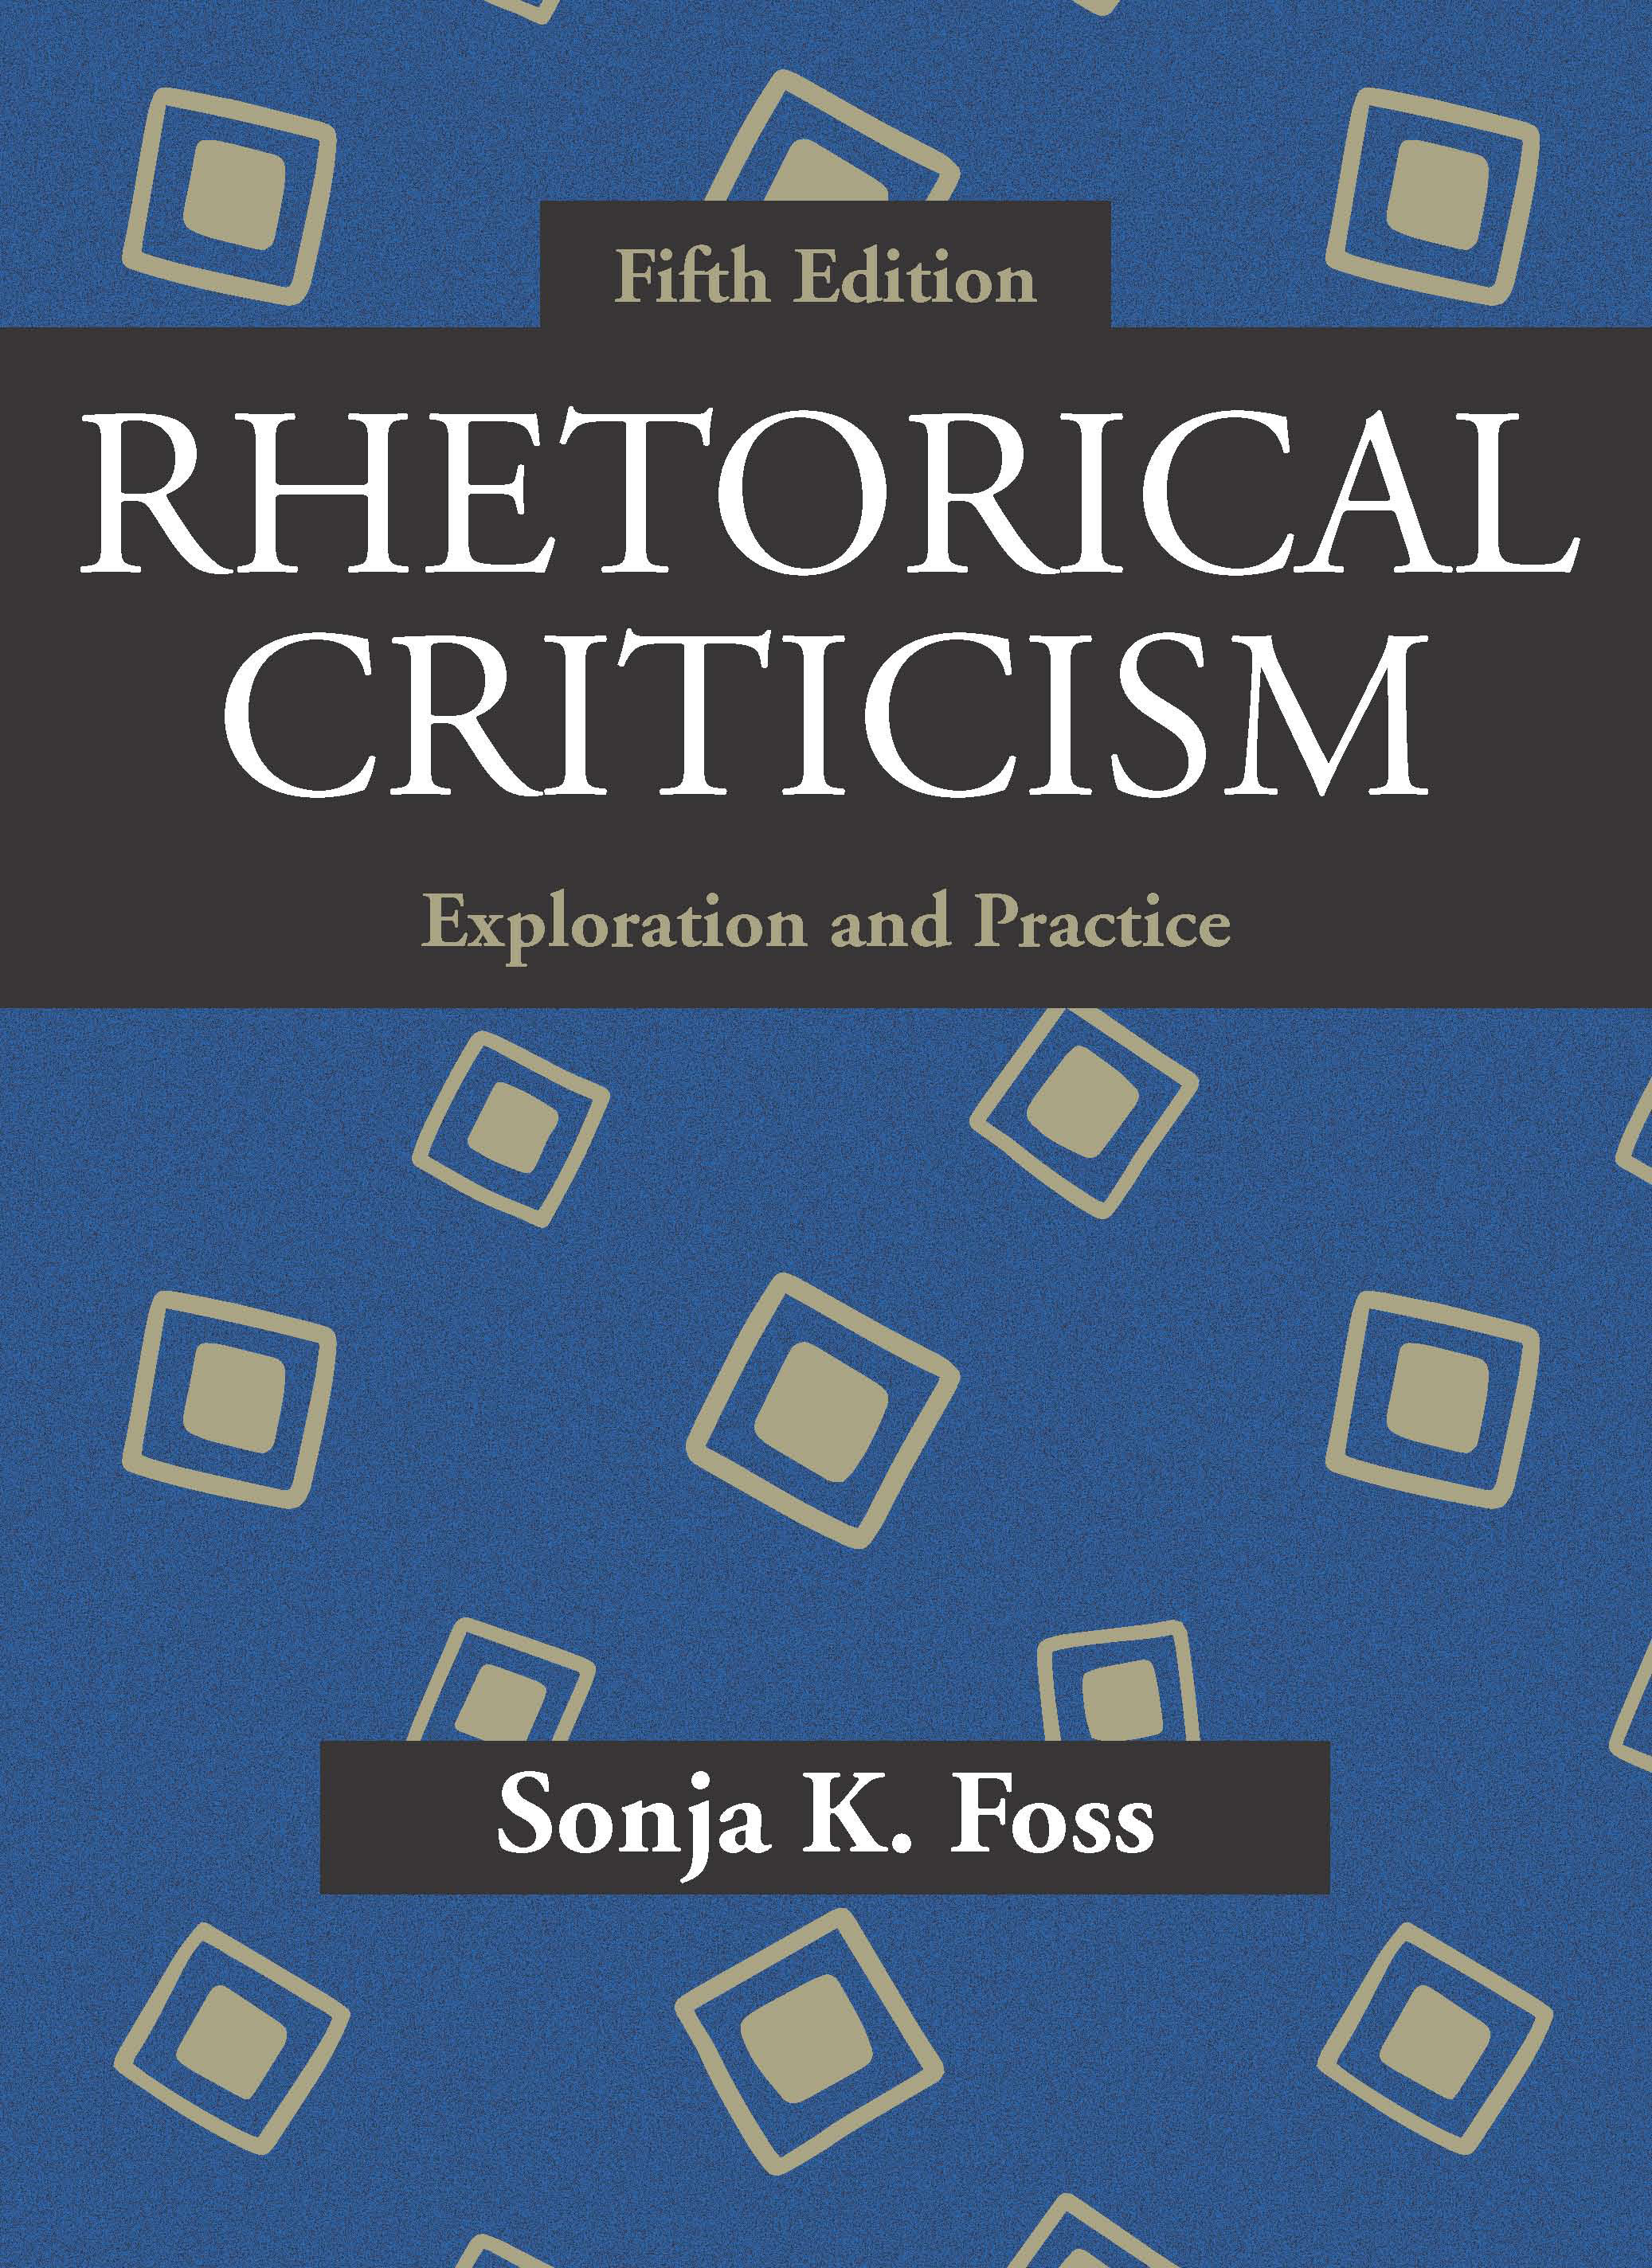 Rhetorical Criticism: Exploration and Practice, Fifth Edition by Sonja K. Foss